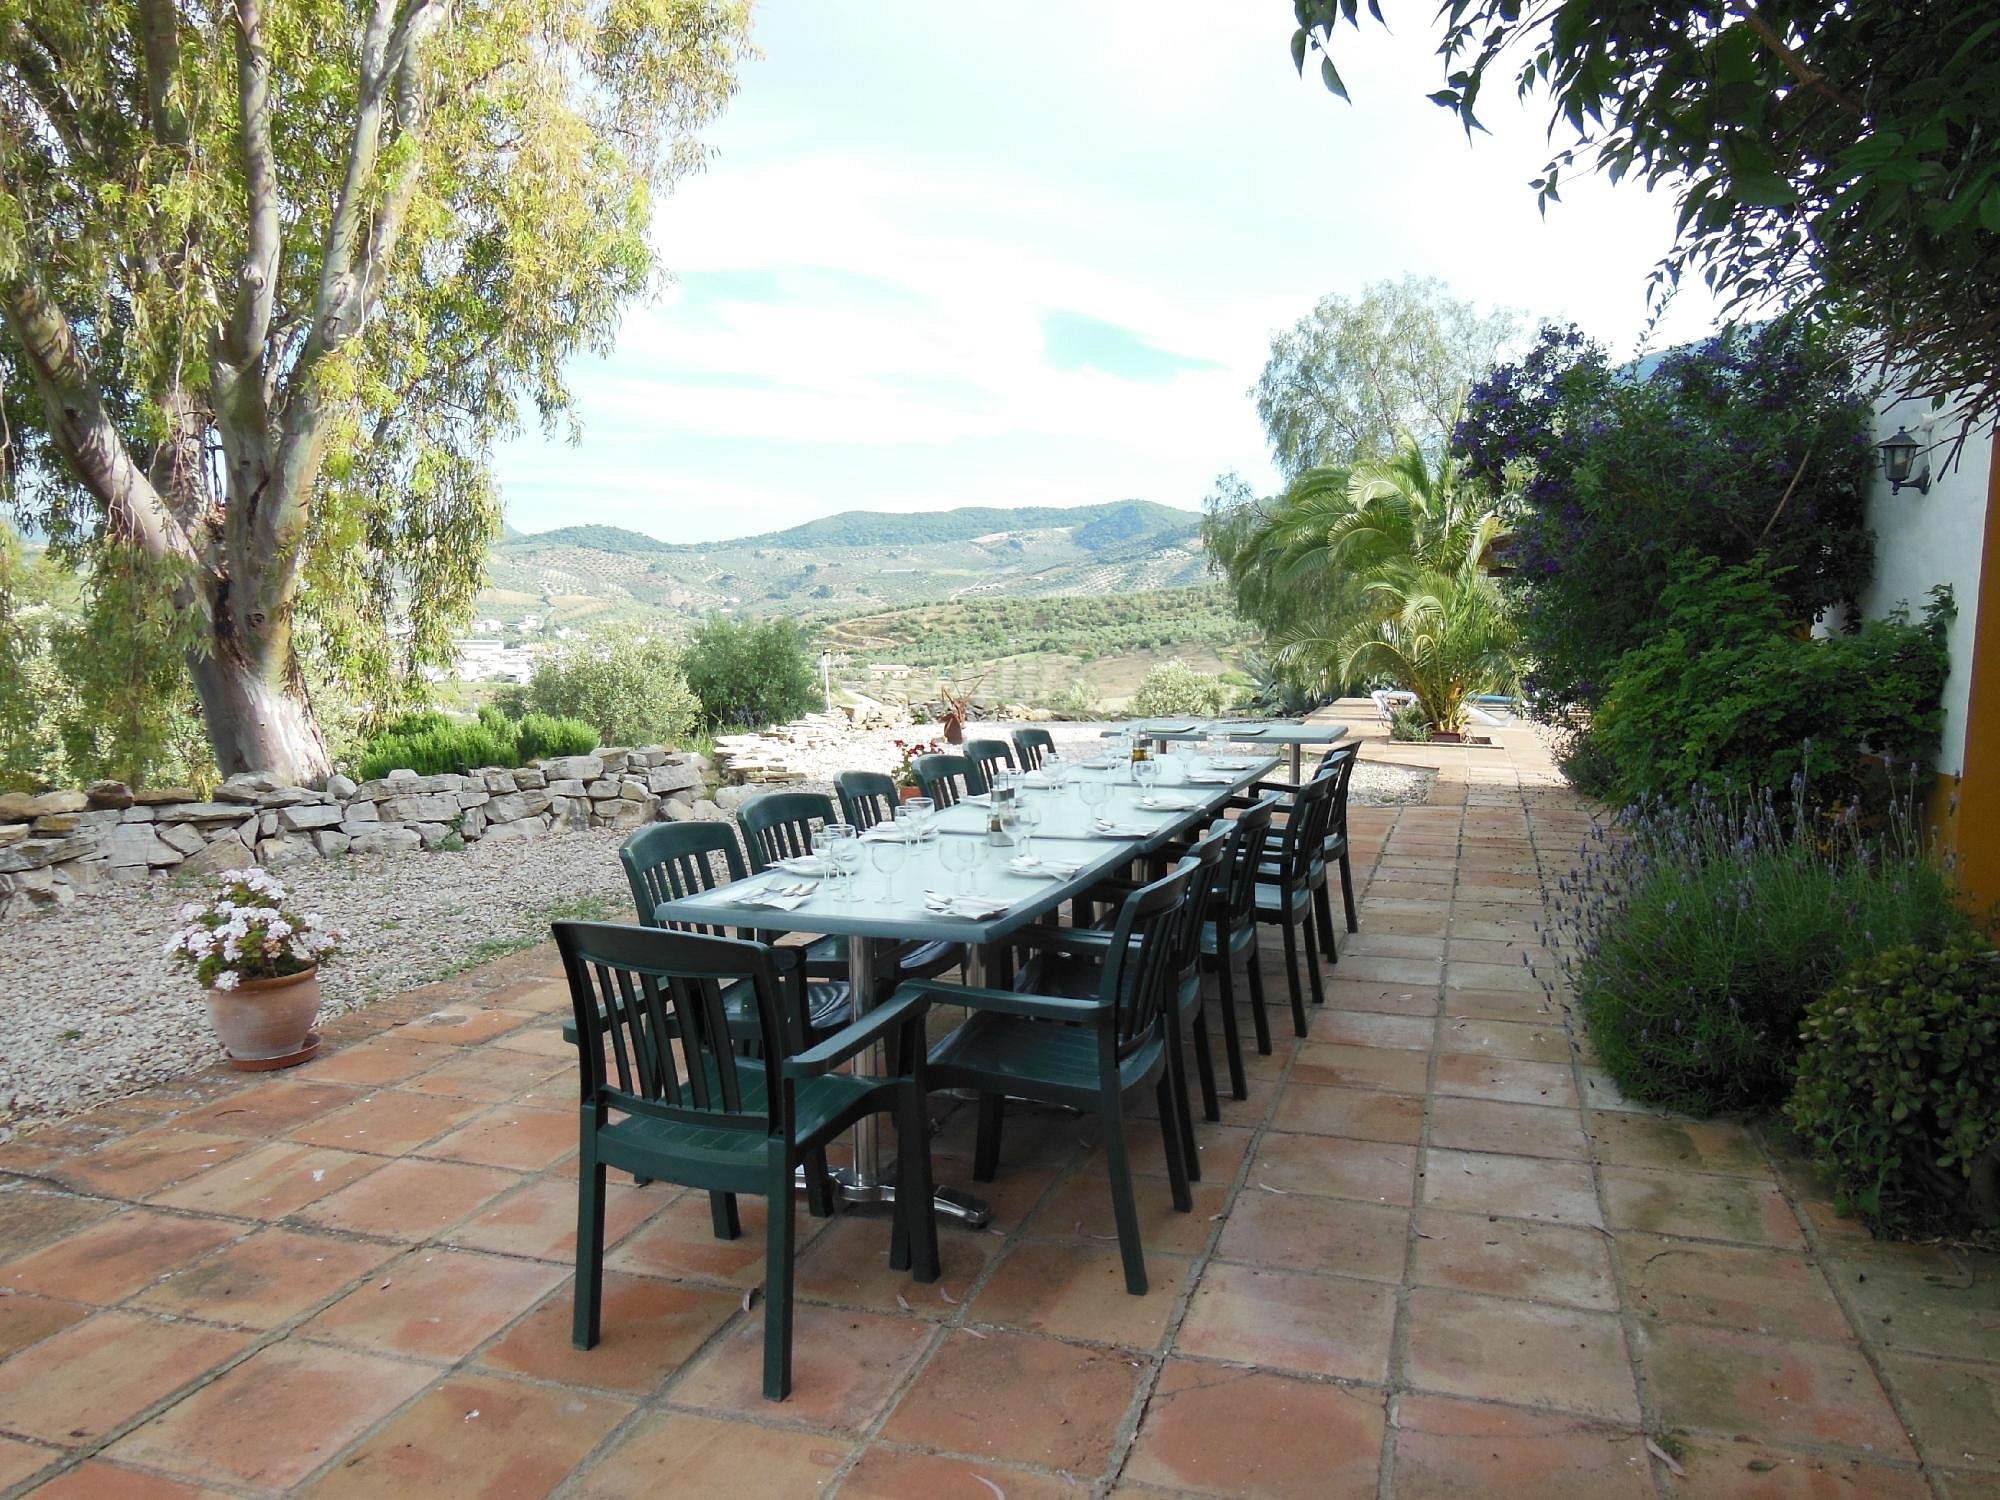 Cortijo Rosario - outside dining on the terrace